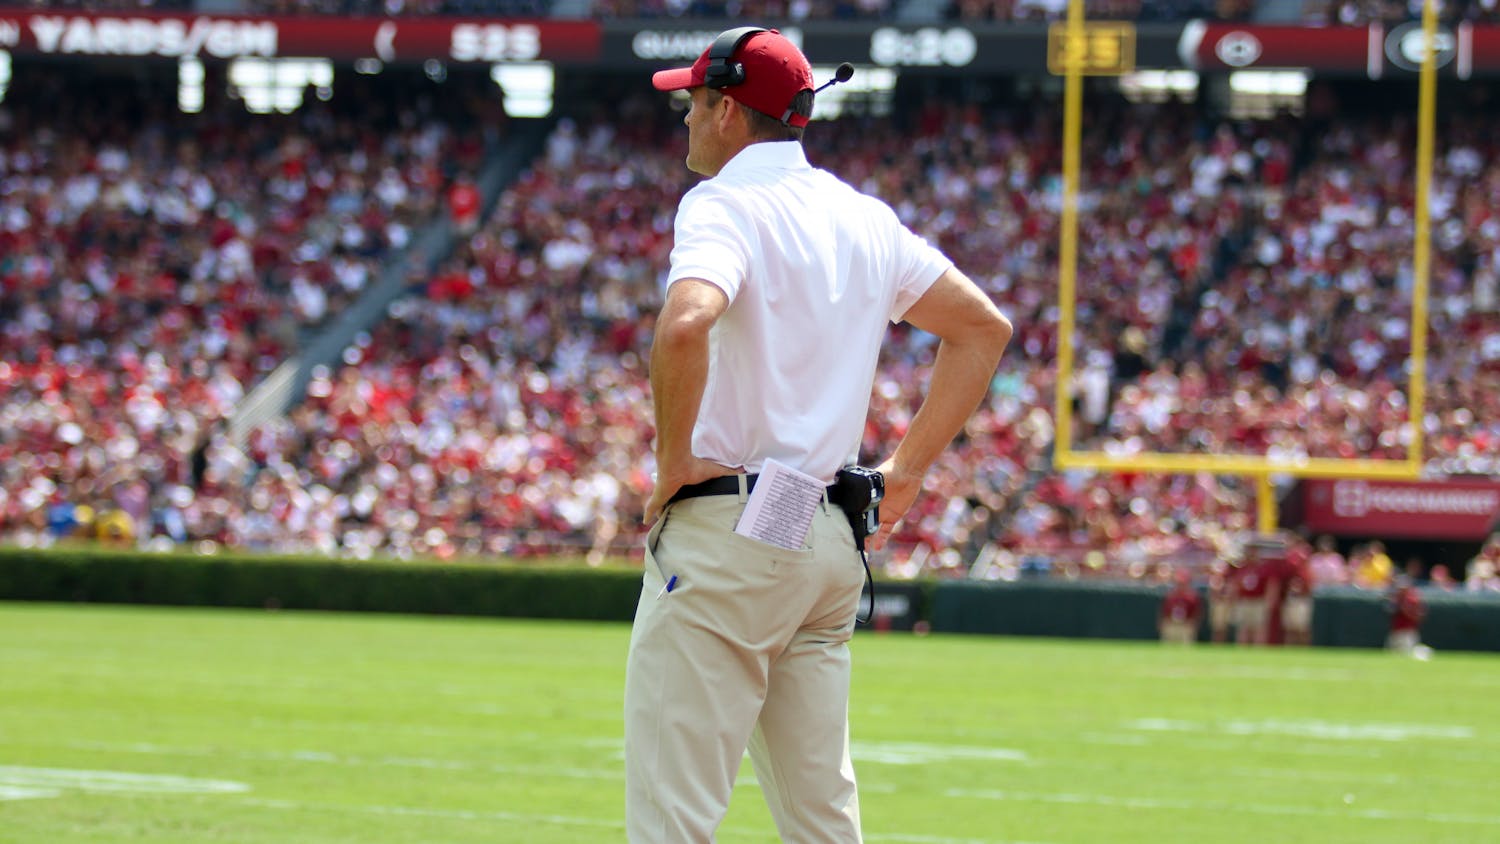 Head coach Shane Beamer looks out on the field during the Gamecock's disappointing game against Georgia on Sep. 17, 2022.